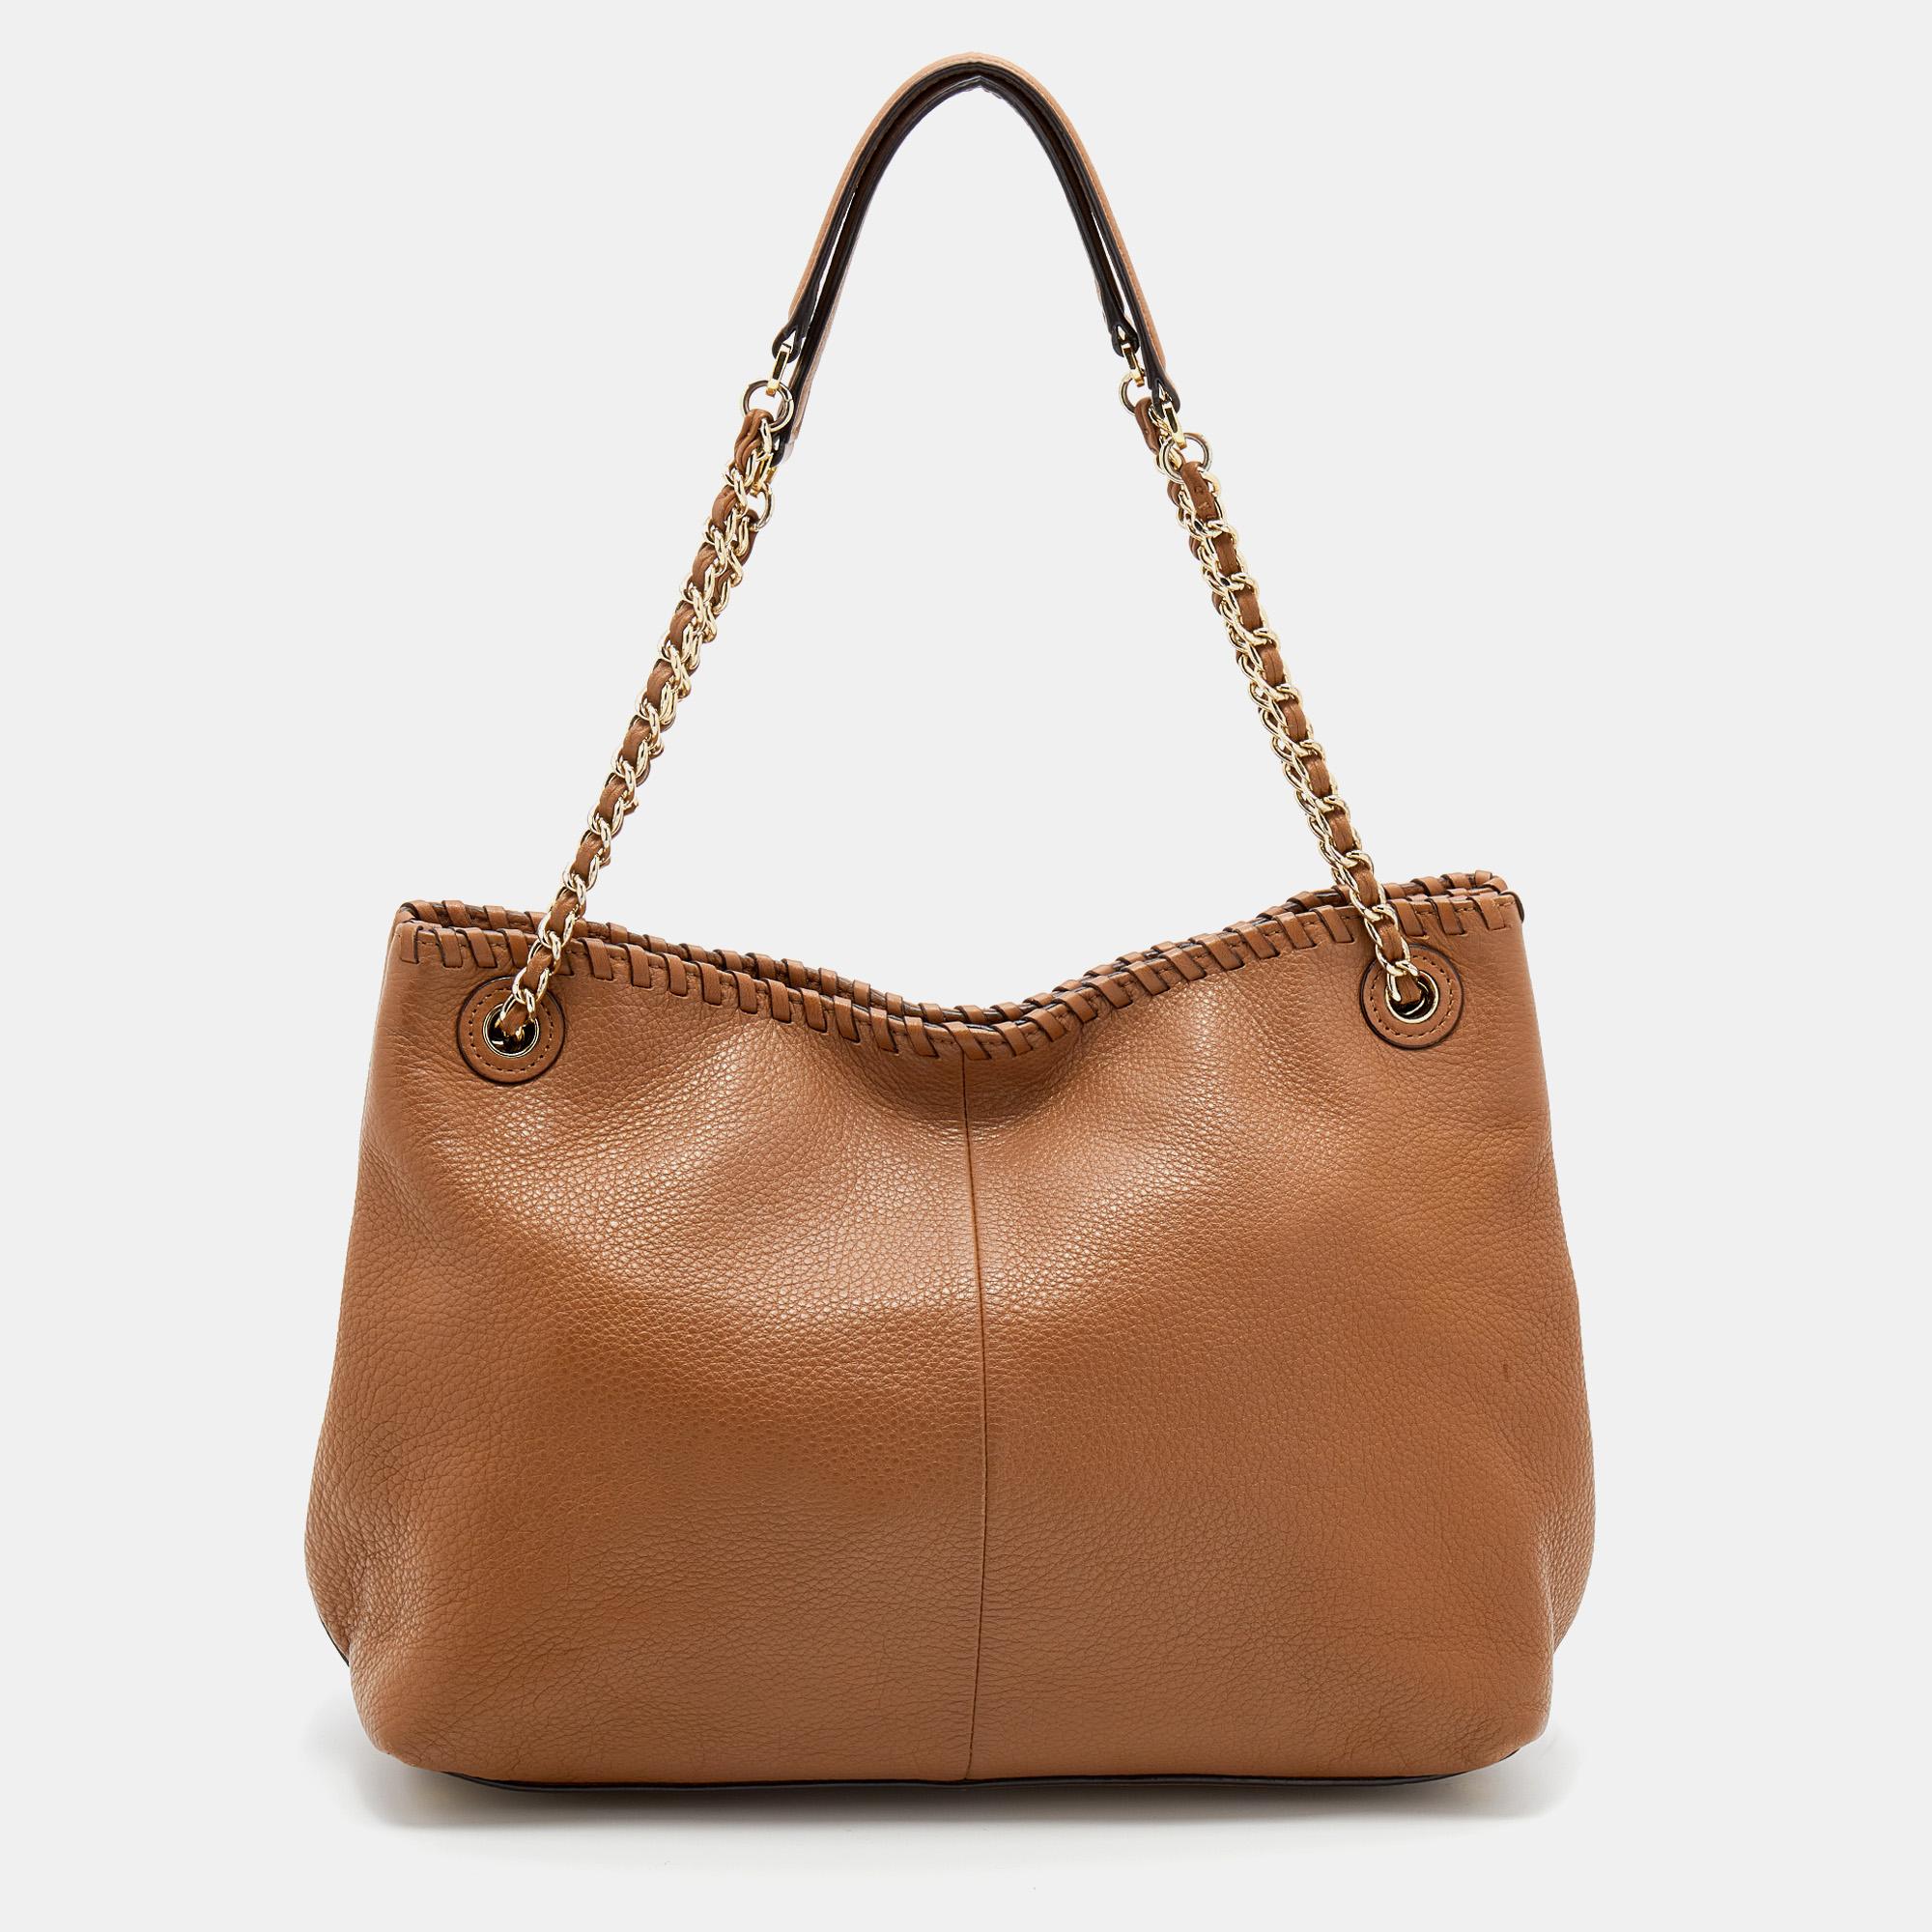 This stylish Marion tote comes from the House of Tory Burch. It is crafted from tan leather on the exterior, which is embellished with whipstitch detailing. It features two handles, gold-toned hardware, and a fabric-lined interior. This creation is